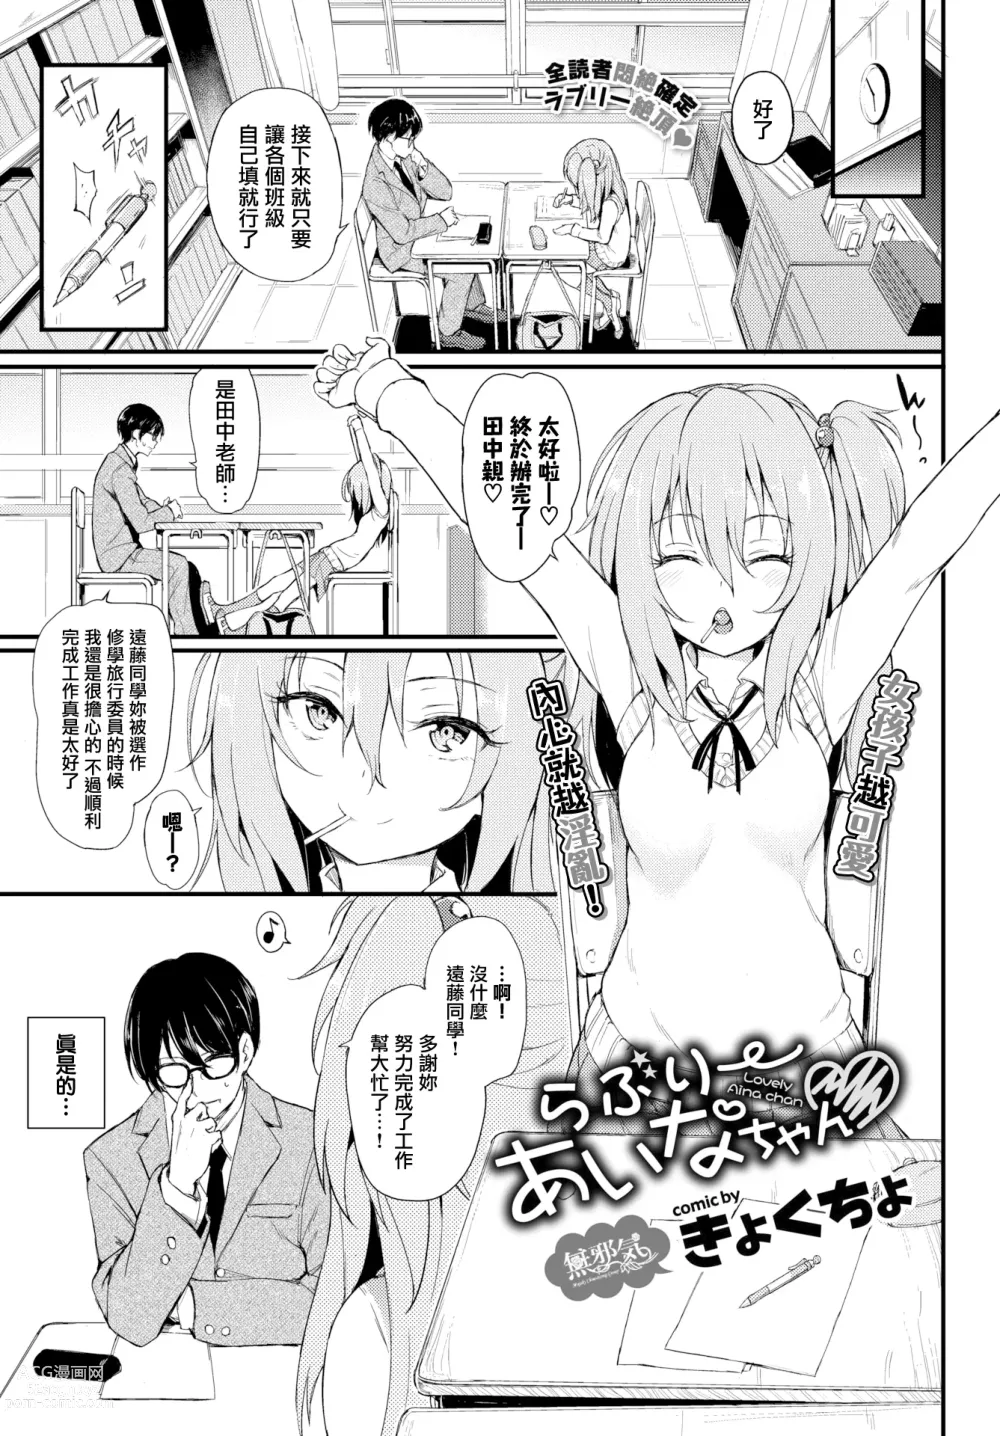 Page 1 of doujinshi Lovely Aina-chan ♥~♥♥♥